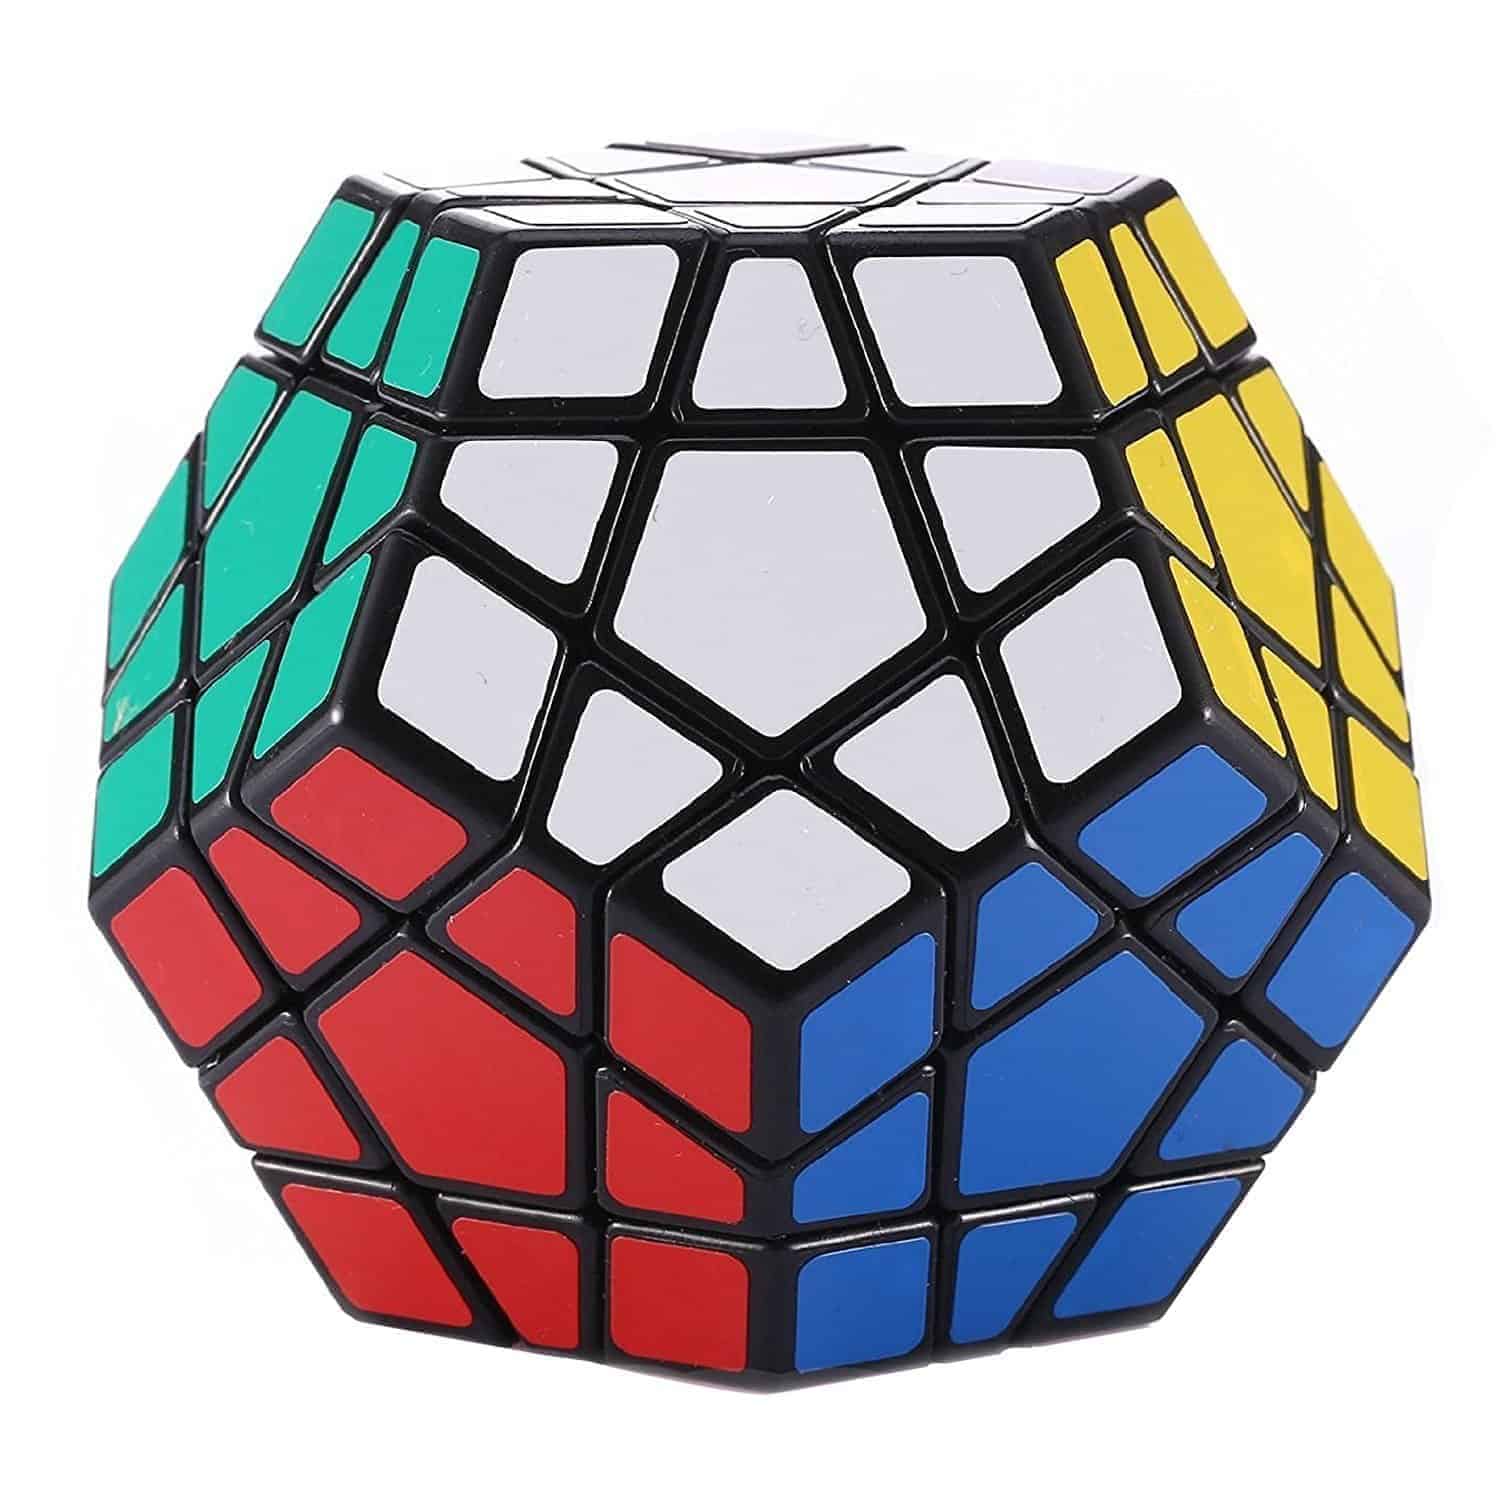 Pot Shaped Cube Puzzle Things I Desire